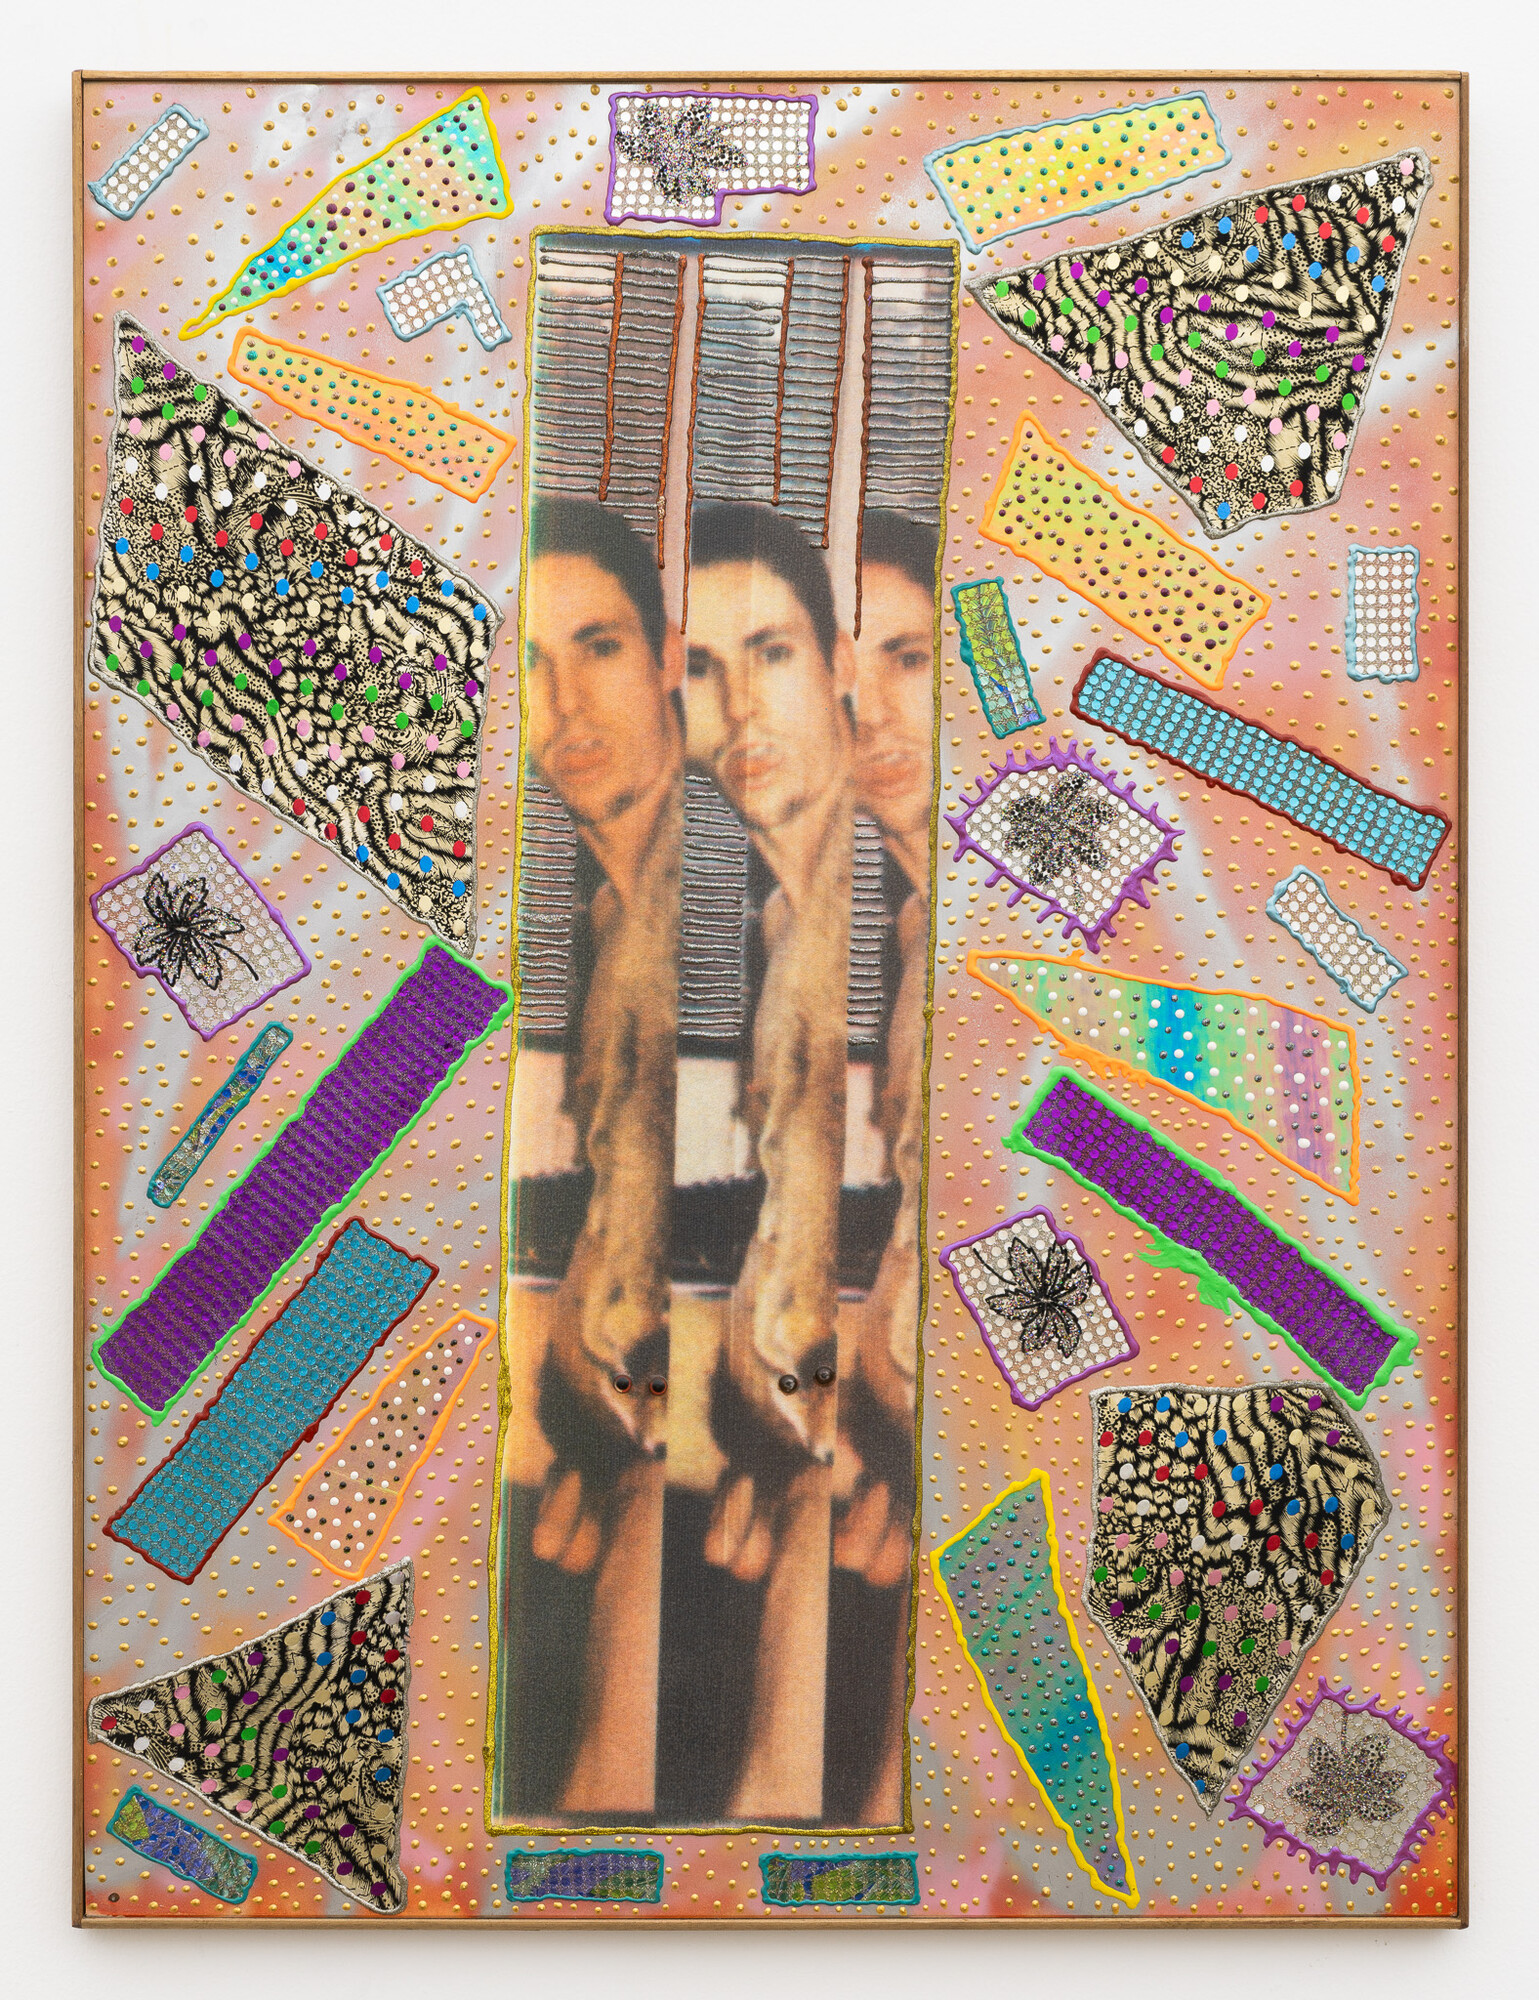 Pat Larter, <em>Image Maker No.2</em>, 1995, laser prints, acrylic and glitter<br />
on board, 122.0 x 92.0 cm. Courtesy of the artist and Neon Parc.